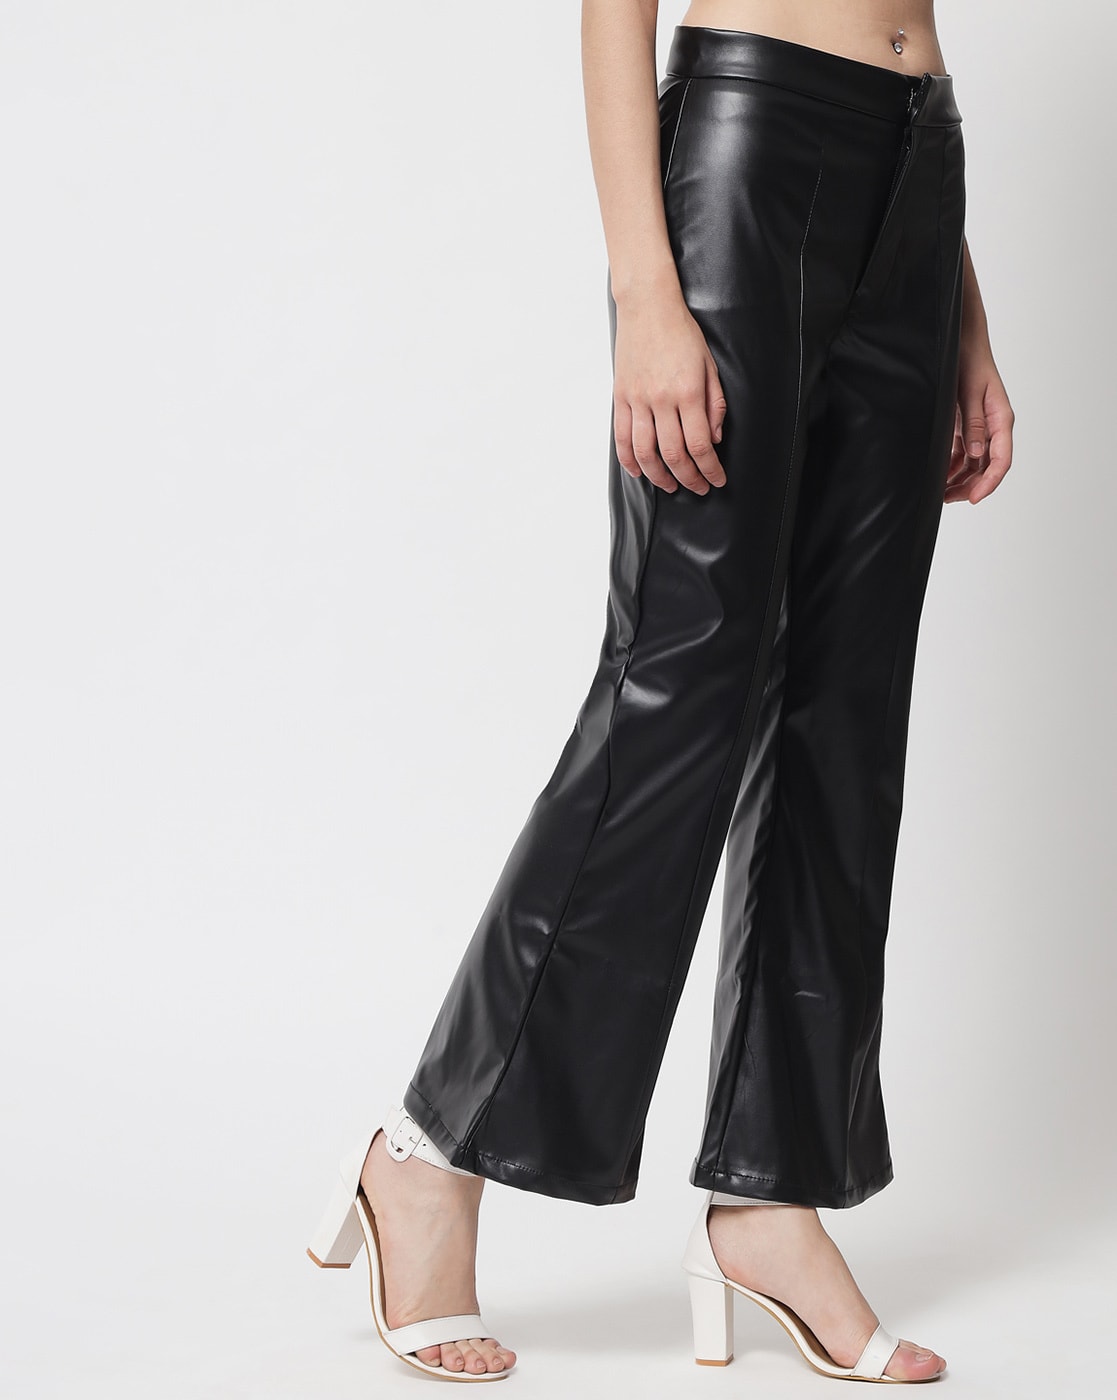 Womens Leather Pants  Judy Black Leather Trousers  KC Leather Co